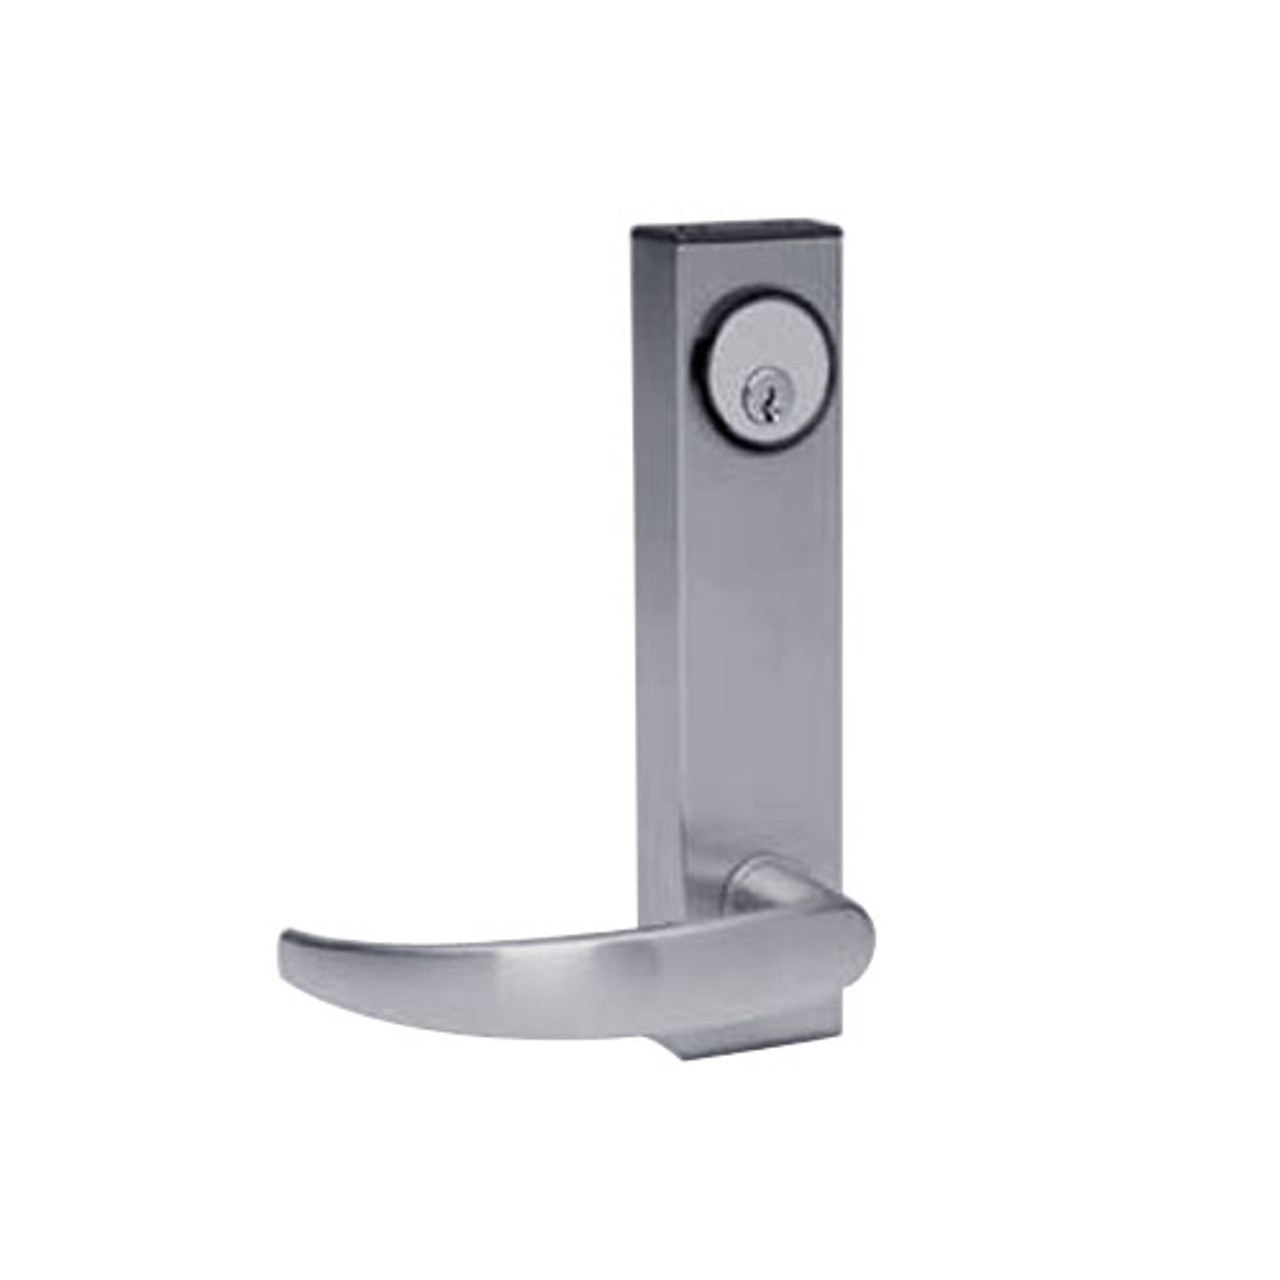 3080E-01-0-91-35 US32D Adams Rite Electrified Entry Trim with Curve Lever in Satin Stainless Finish